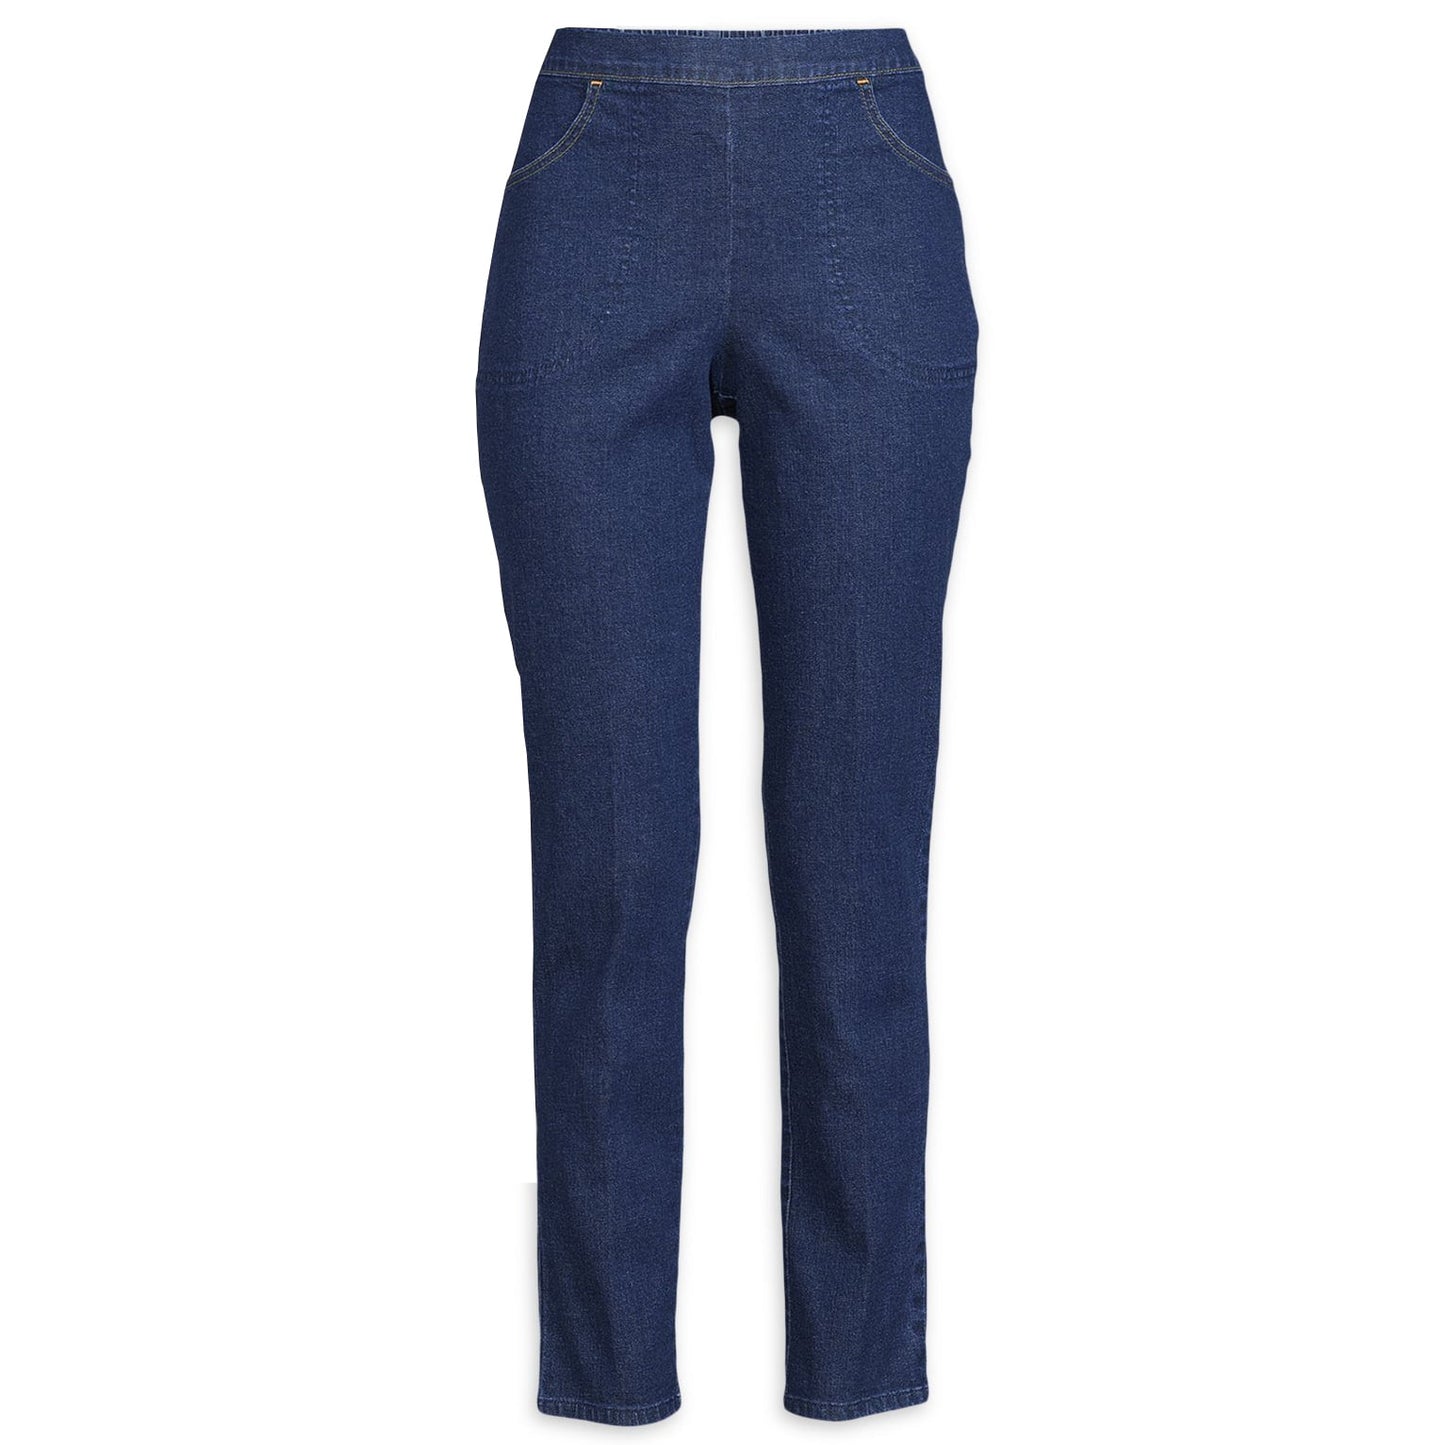 RealSize Womens Stretch Pull On Pants with Two Front Pockets